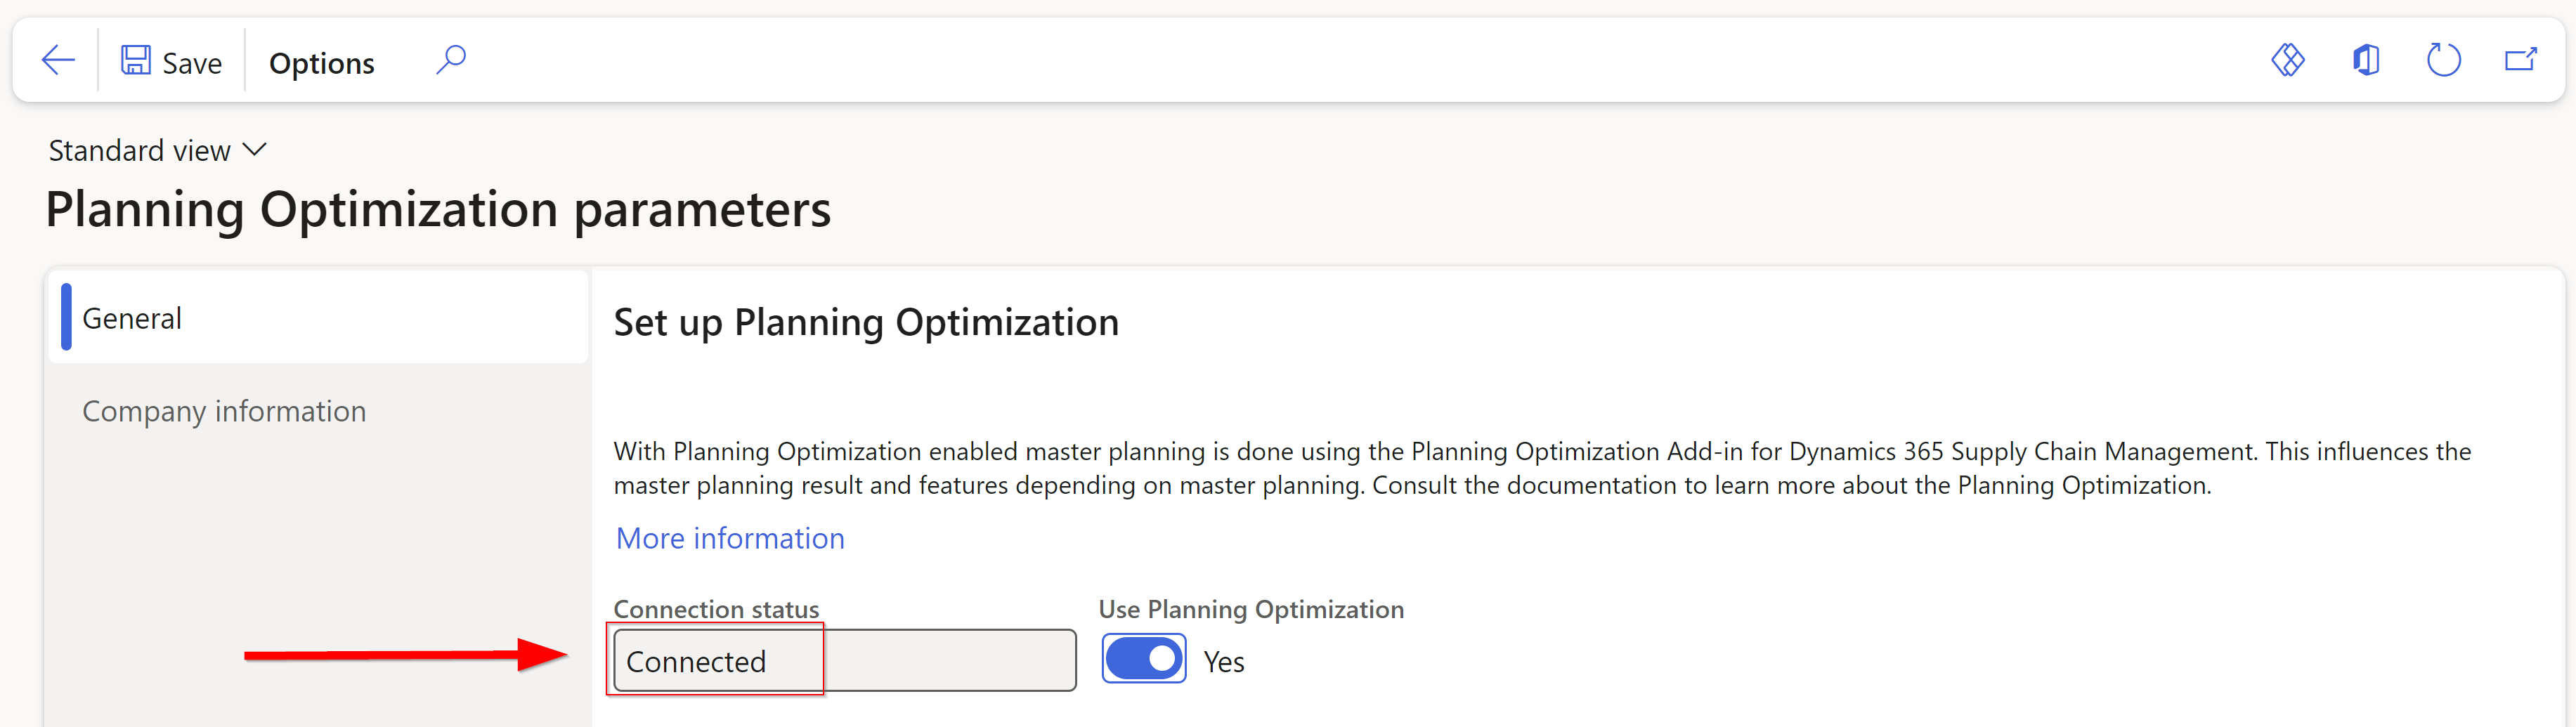  Screenshot of the Planning Optimization parameters page.